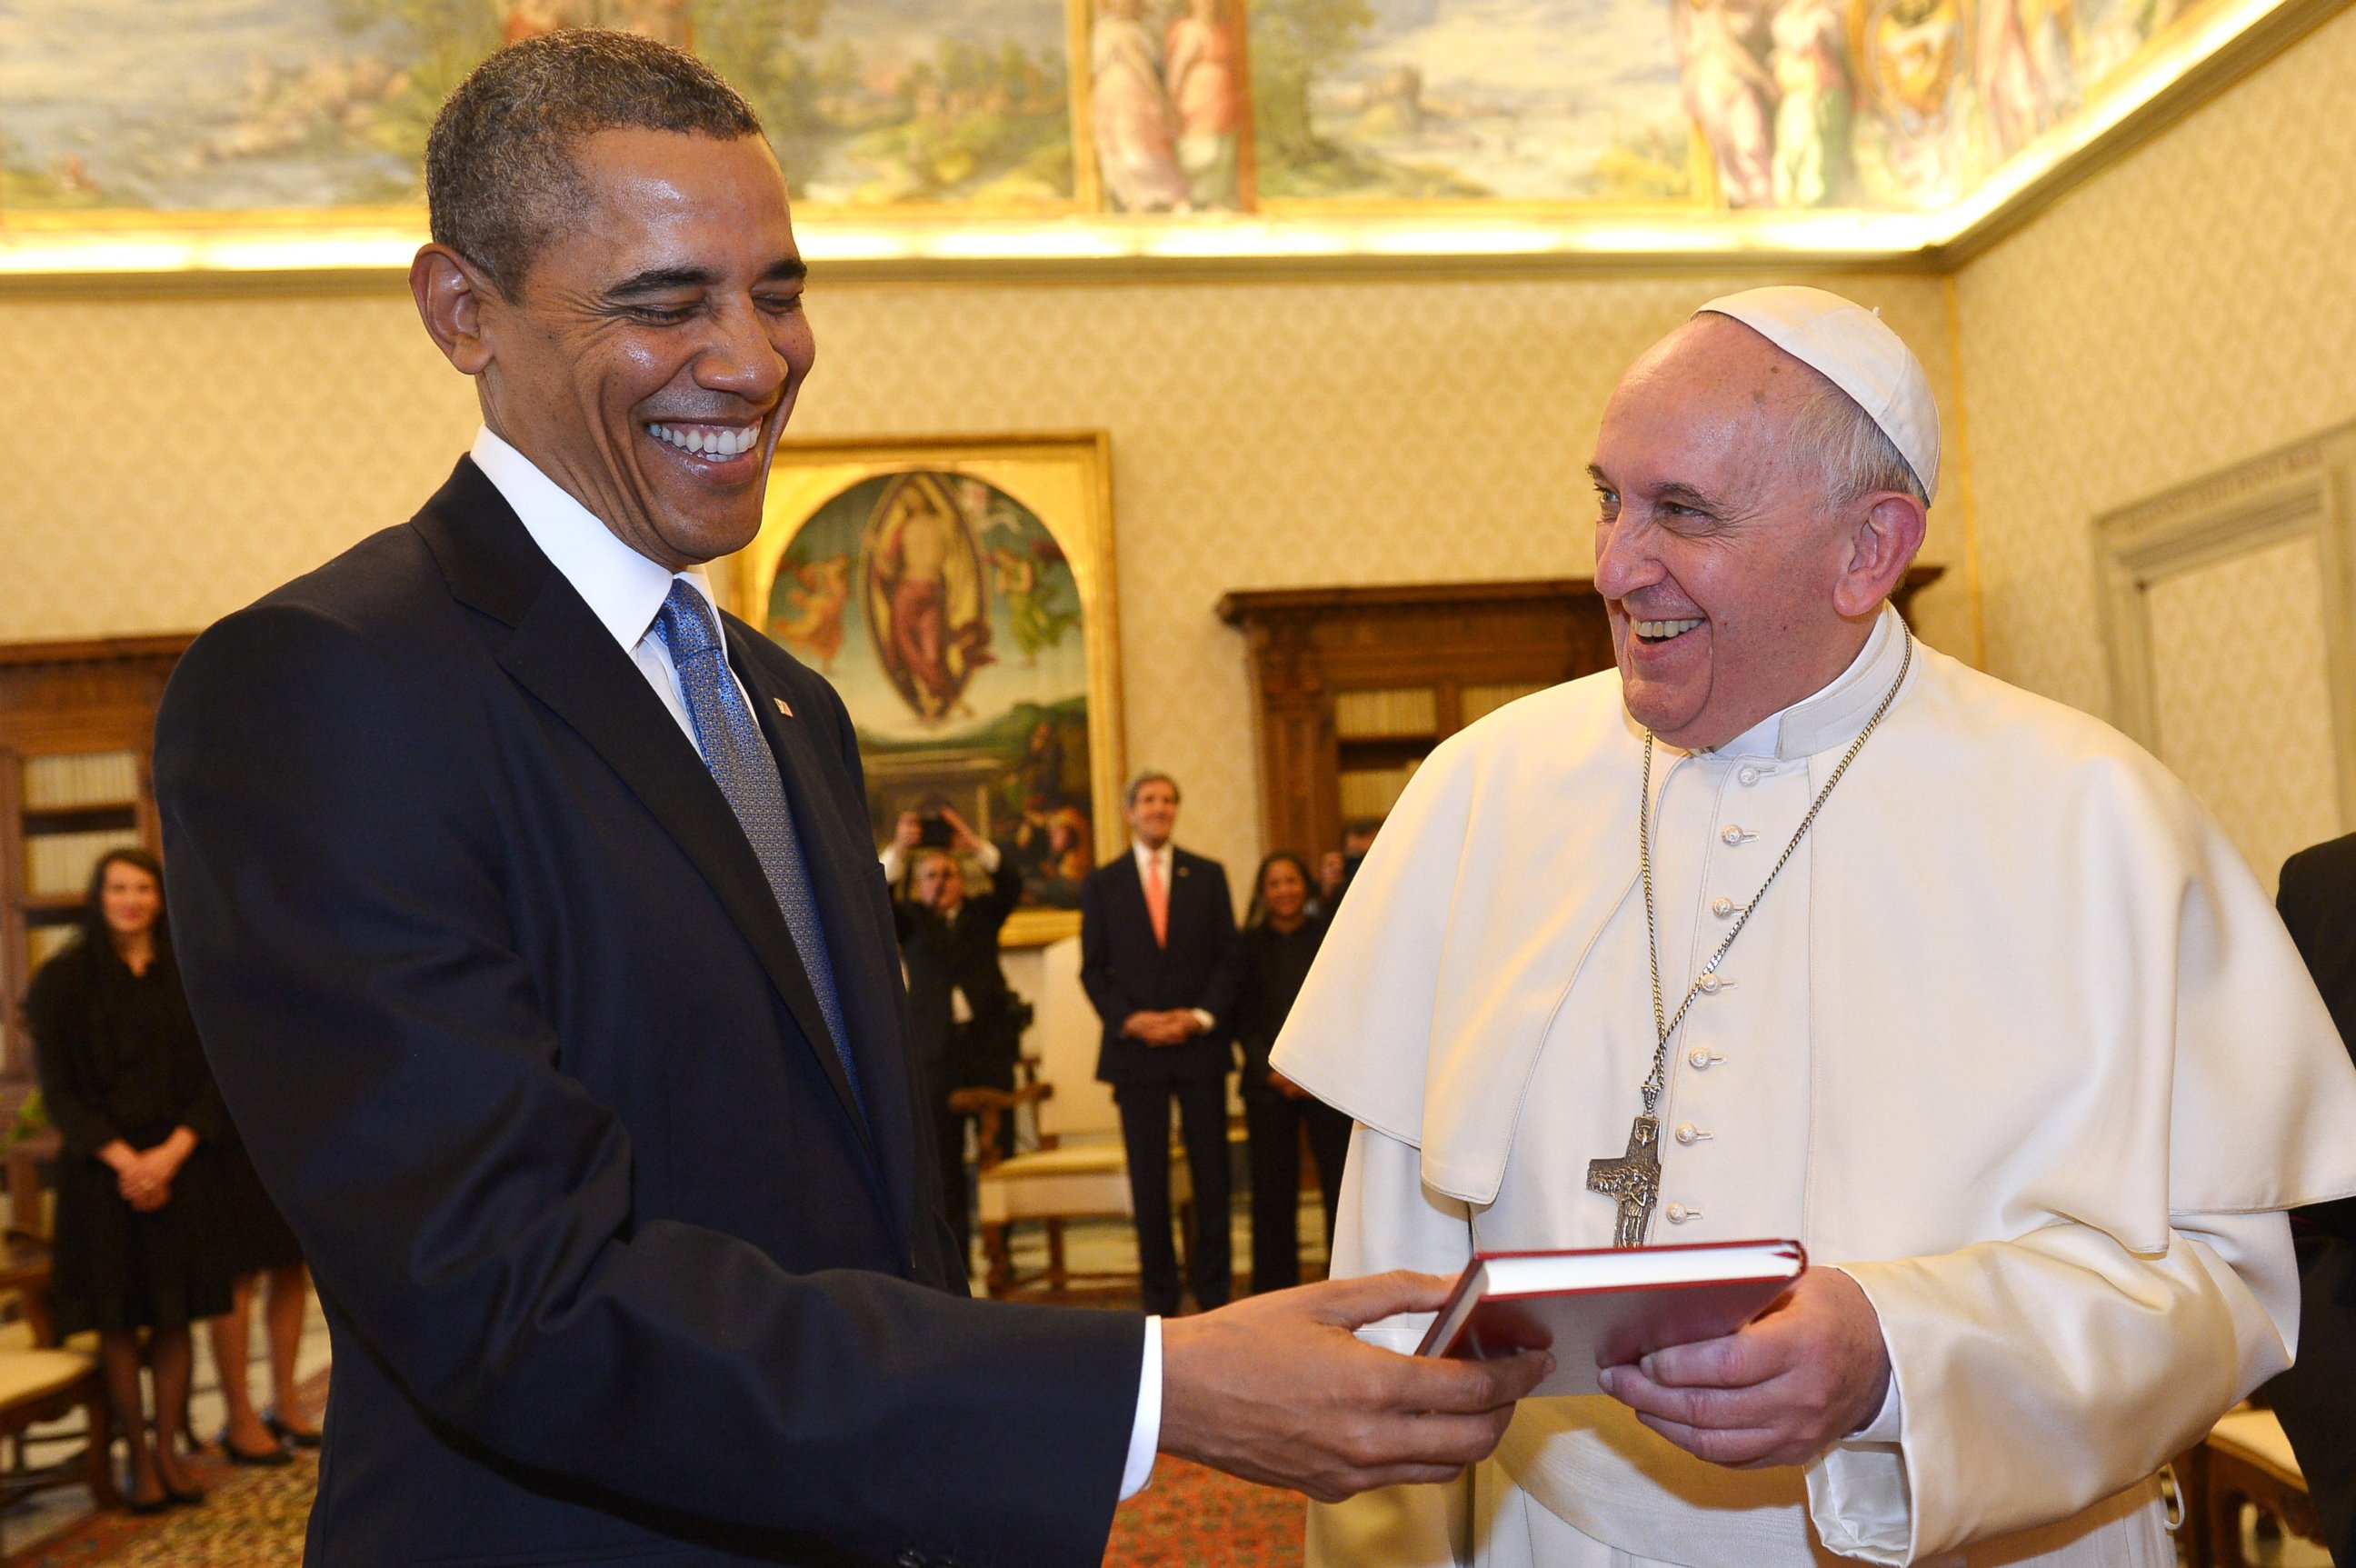 PHOTO: Pope Francis and President Barack Obama smile as they exchange gifts, at the Vatican, March 27, 2014.